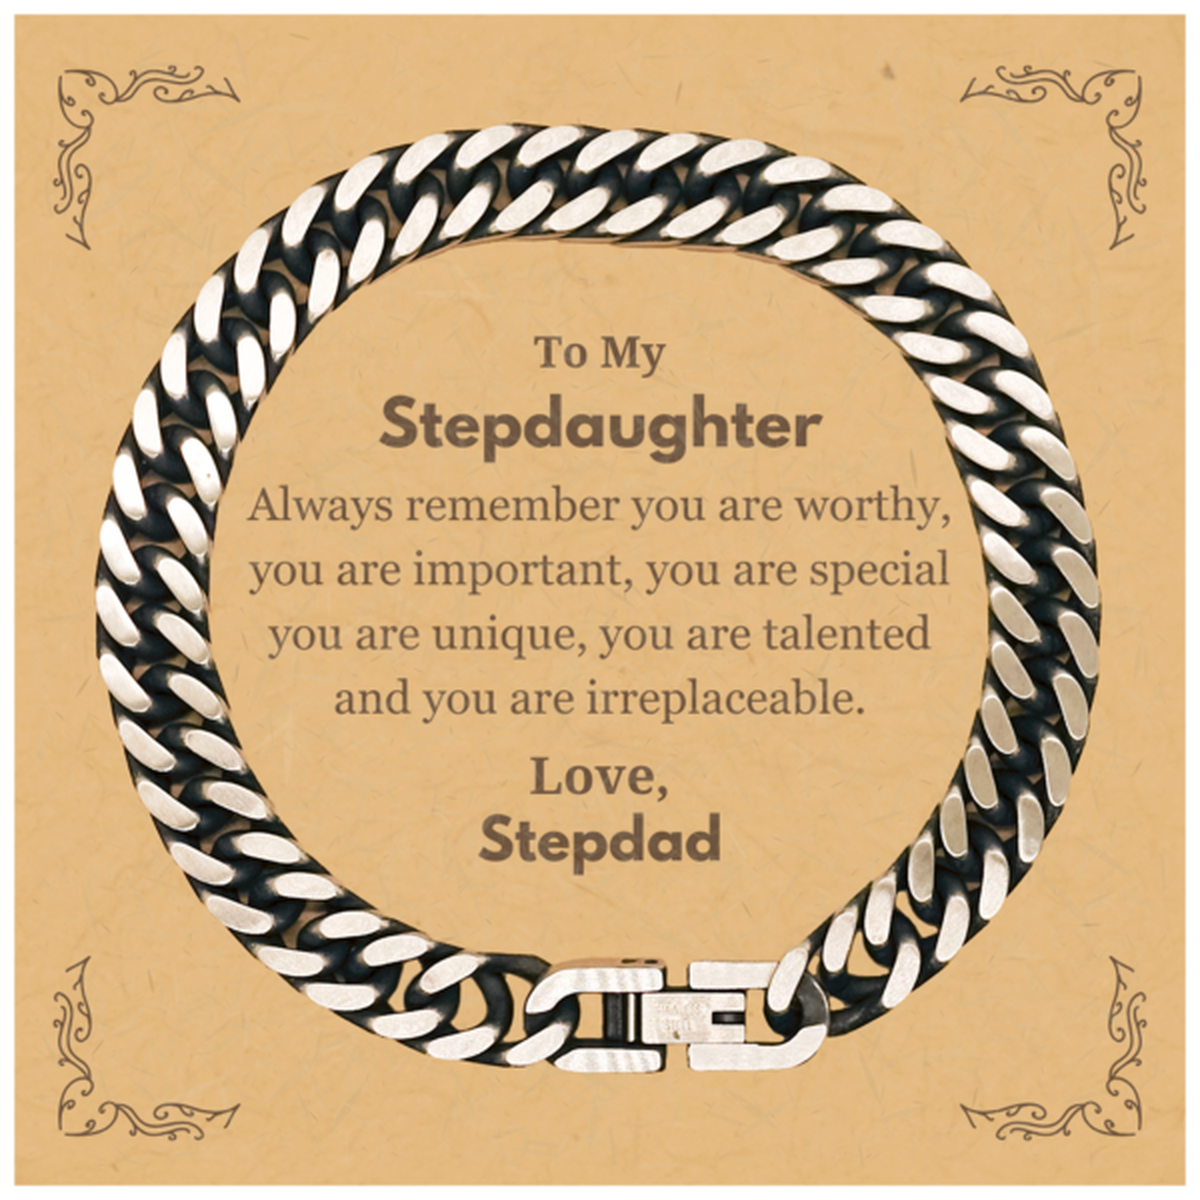 Stepdaughter Birthday Gifts from Stepdad, Inspirational Cuban Link Chain Bracelet for Stepdaughter Christmas Graduation Gifts for Stepdaughter Always remember you are worthy, you are important. Love, Stepdad